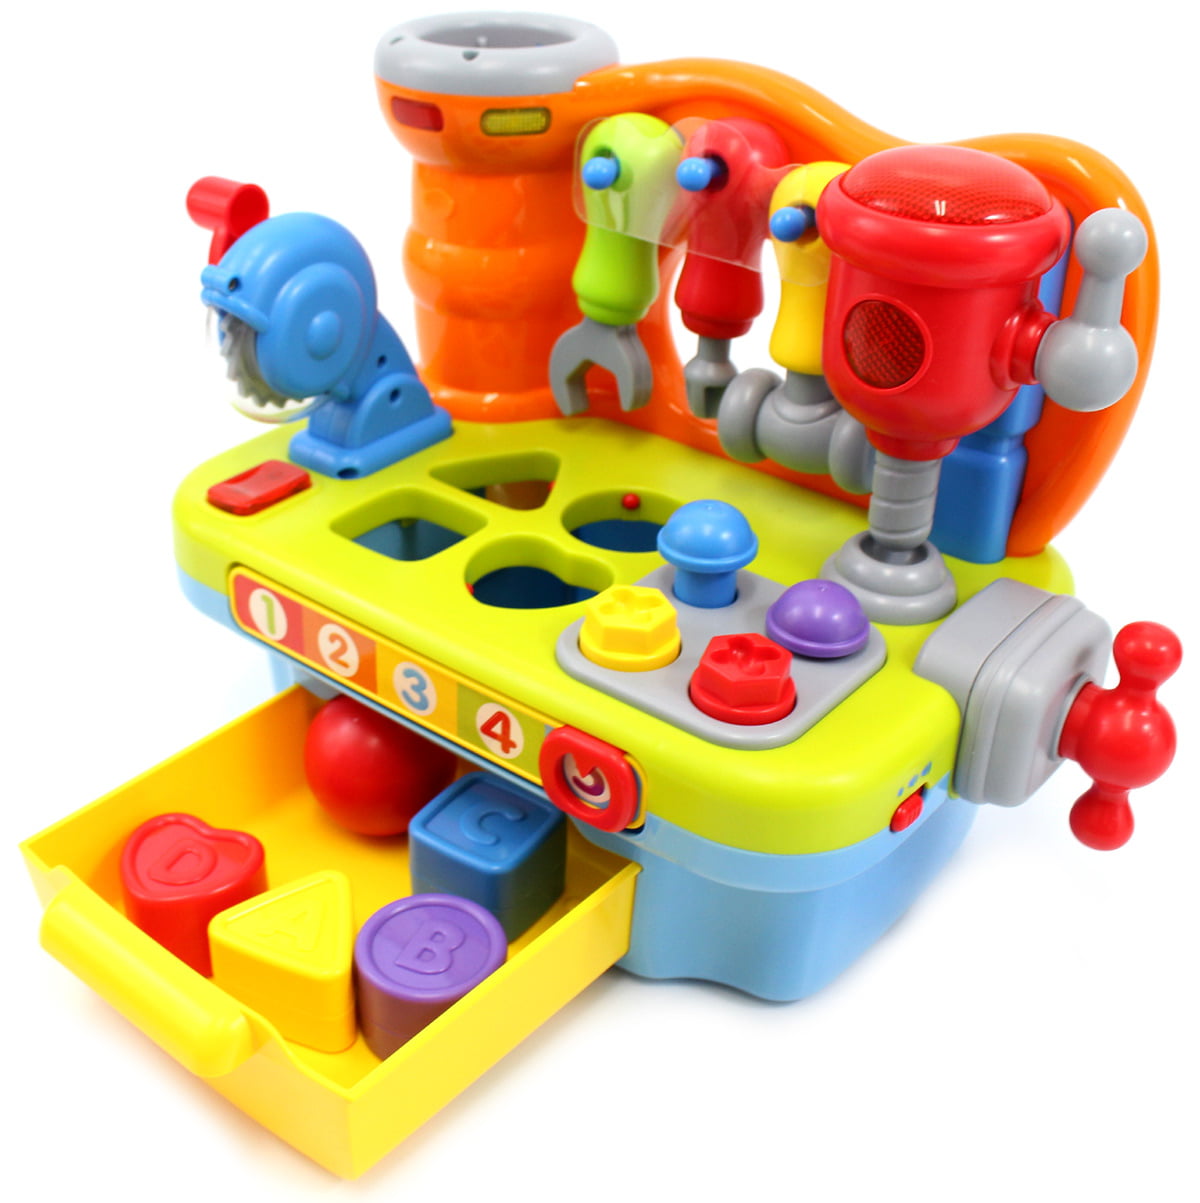 Toysery Musical Learning Workbench Toy Set for Kids with Shape Sorter Tools Sounds & Lights Gift for Toddler Boys & Girls 3 Years Old 